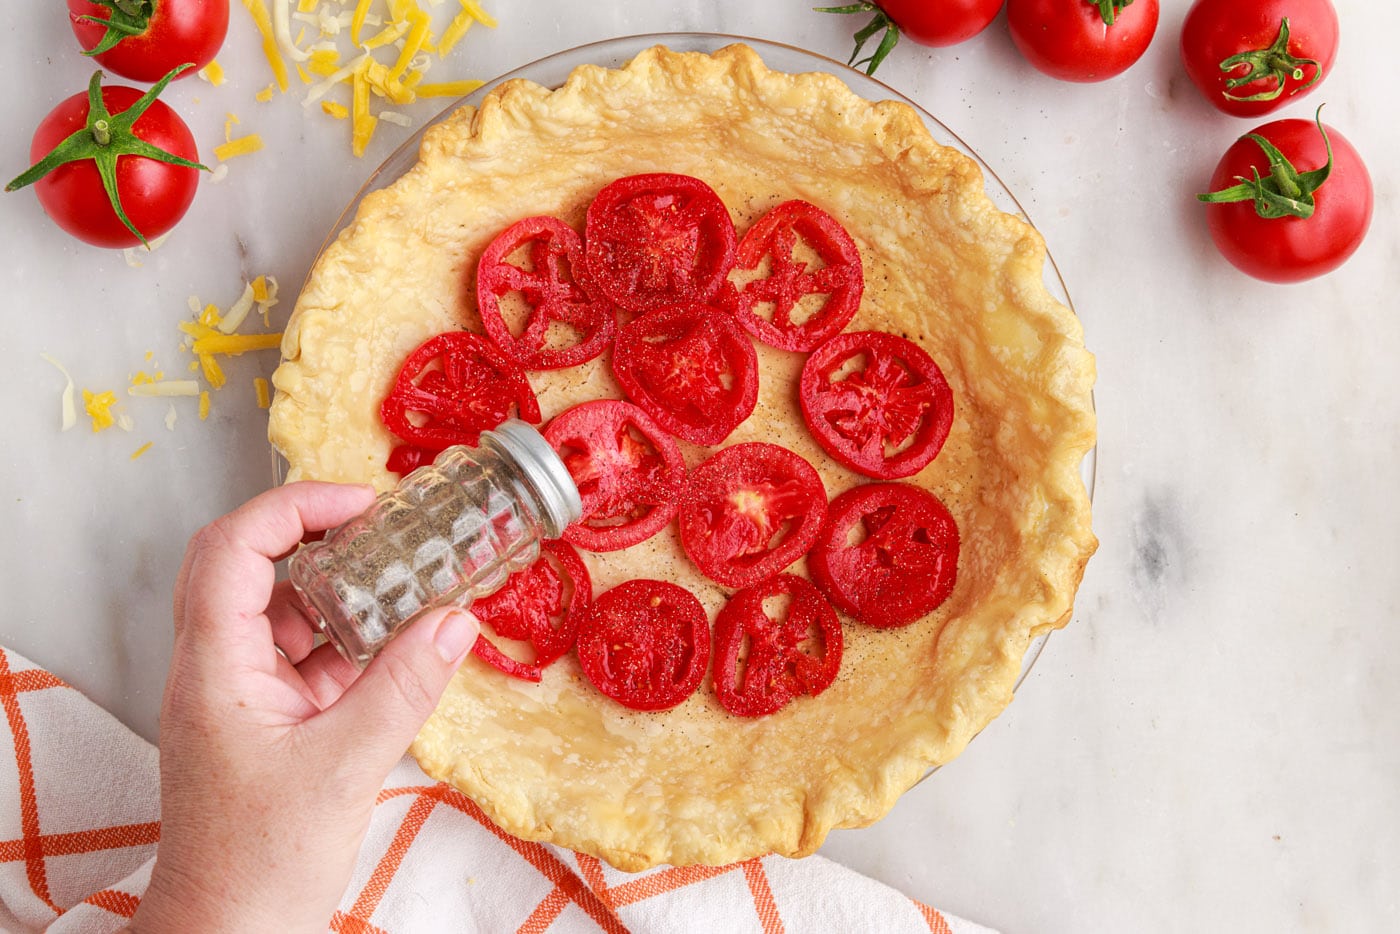 sprinkling black pepper on top of tomato pie